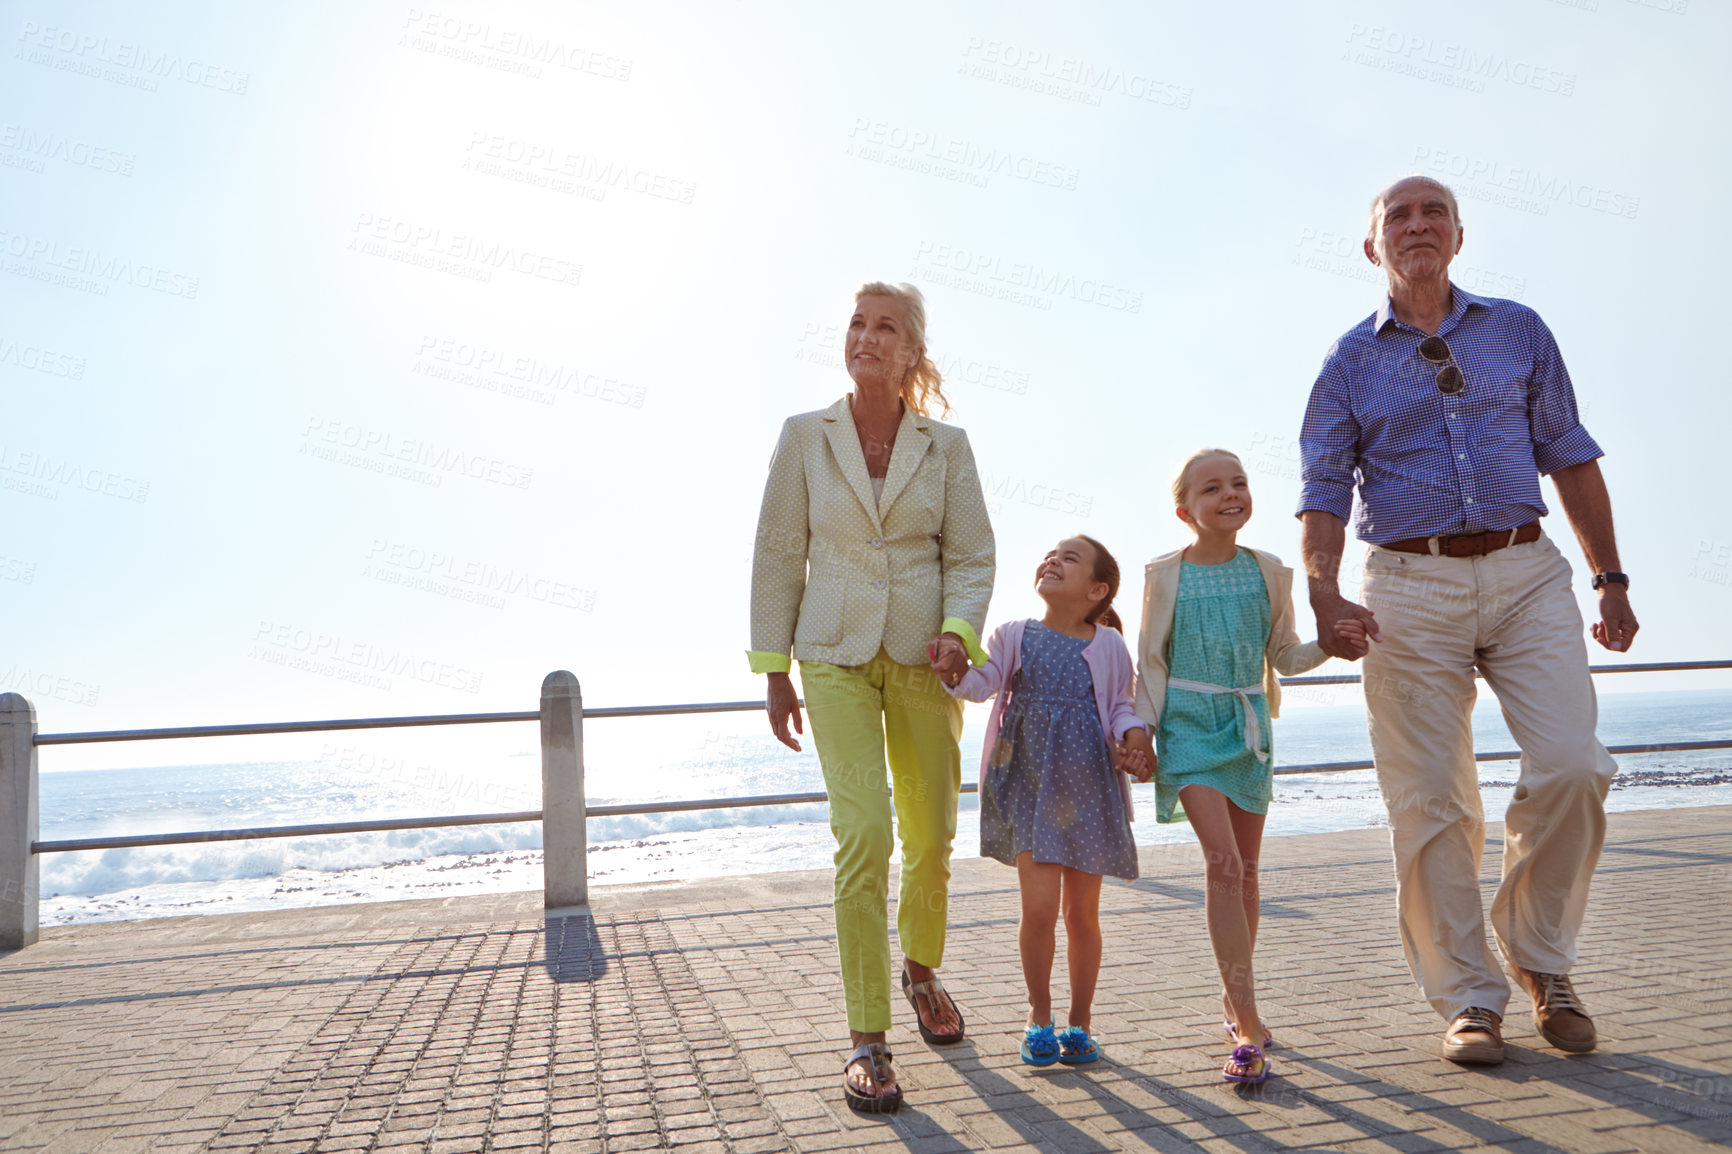 Buy stock photo Shot of grandparents walking hand in hand with their granddaughters on a promanade